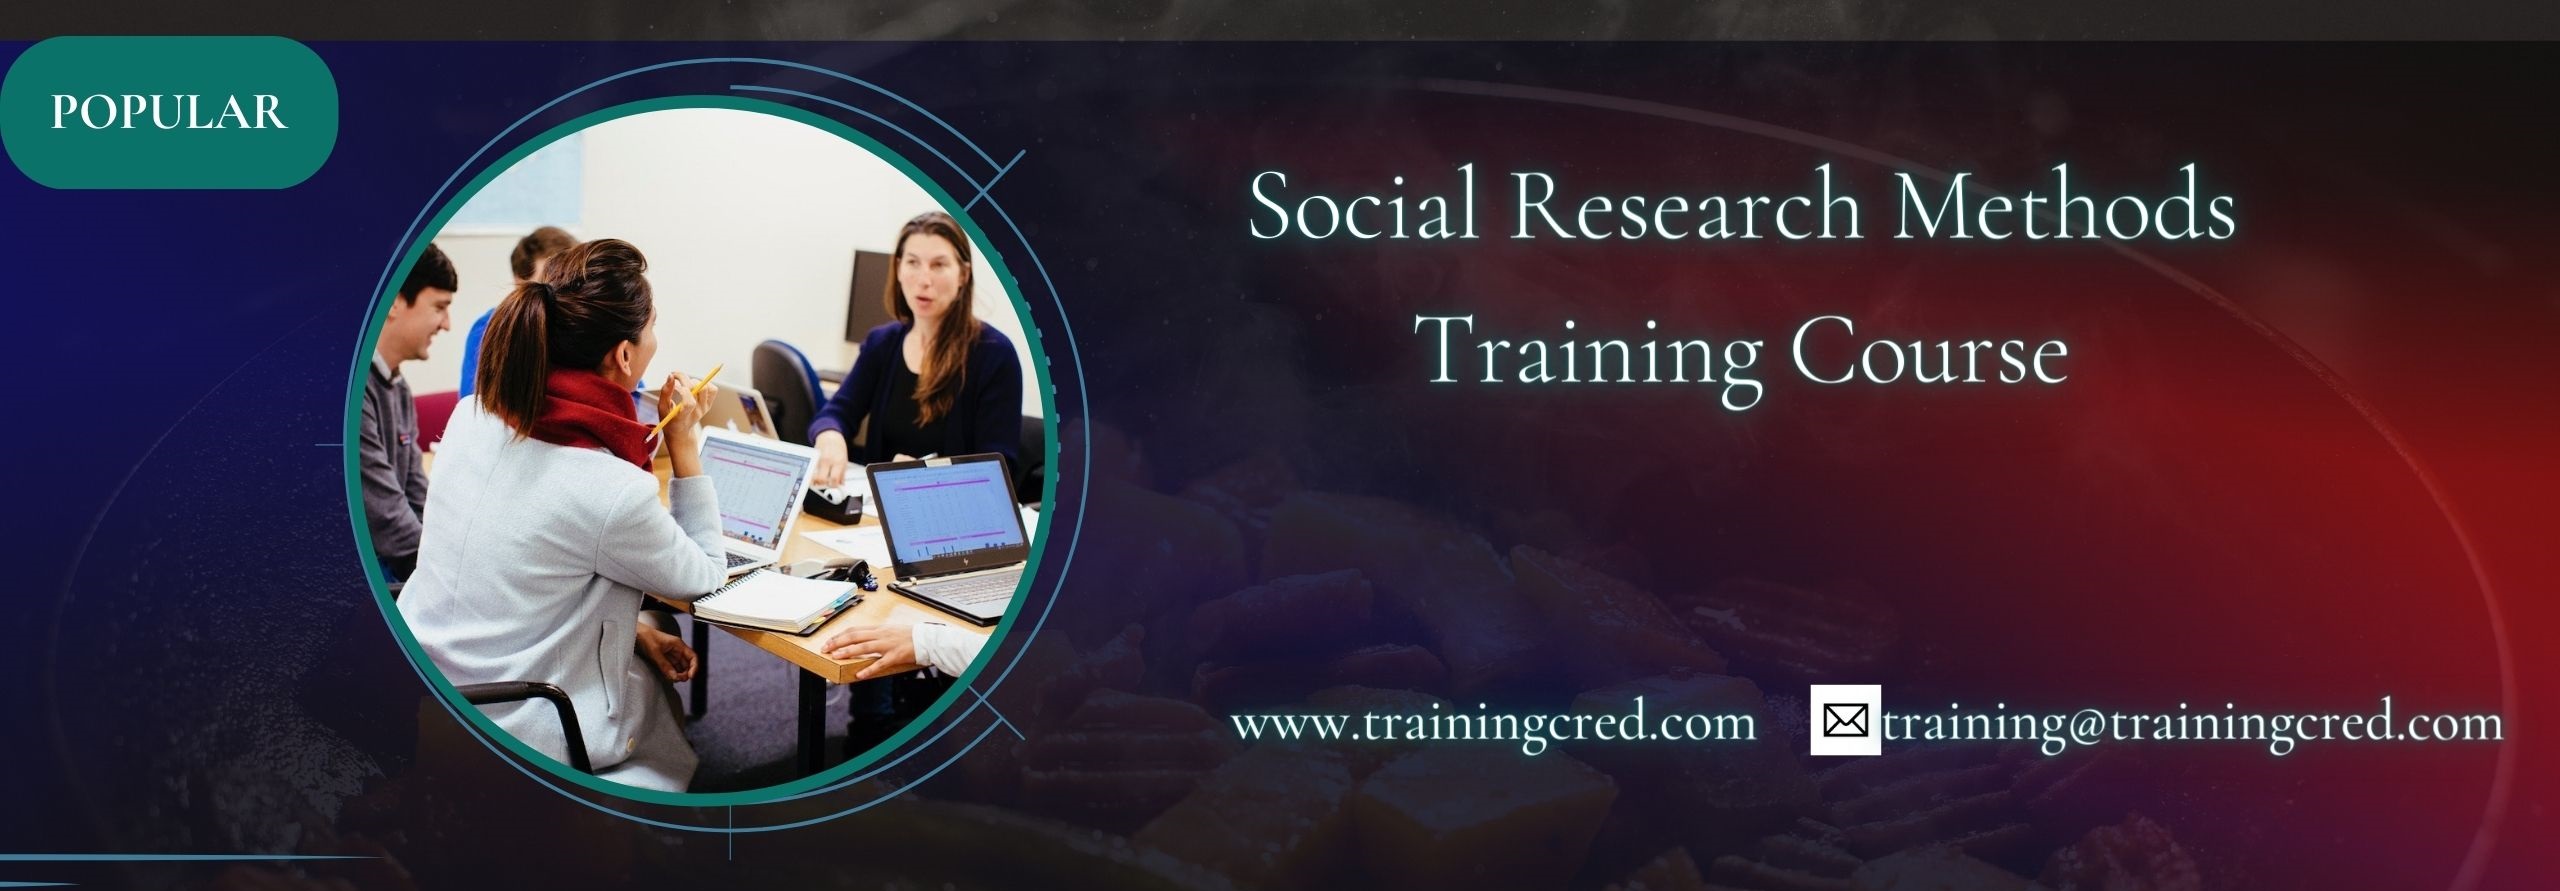 Social Research Methods Training